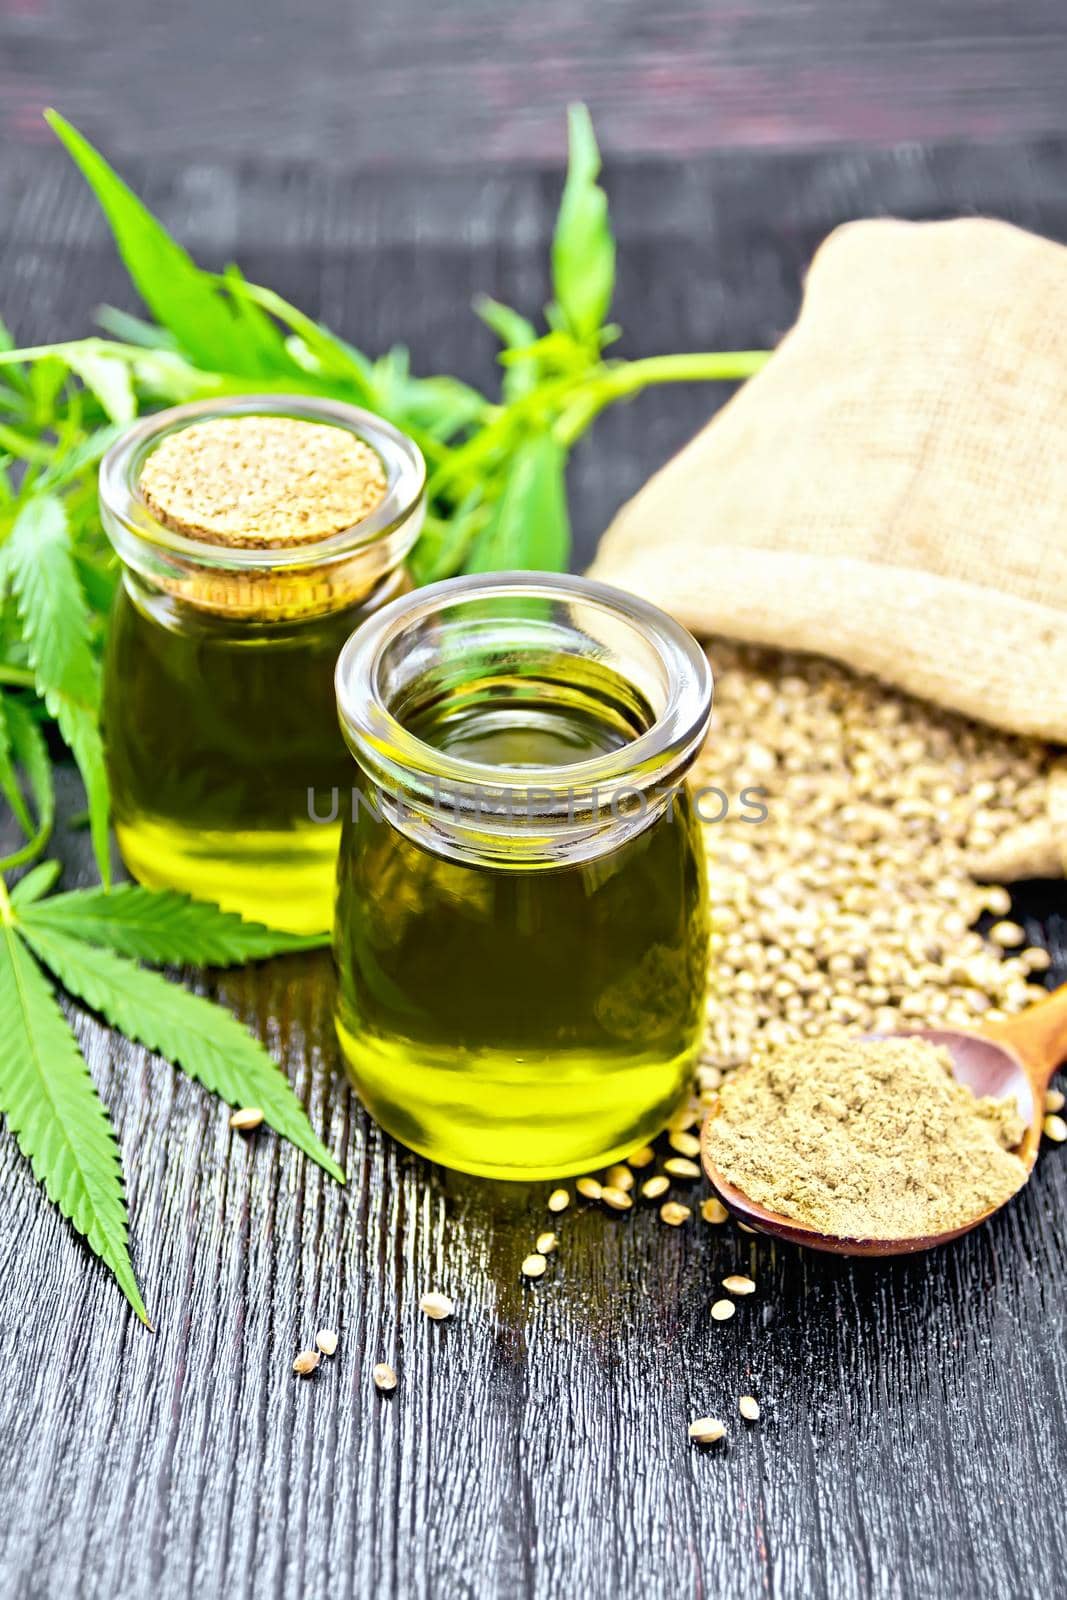 Hemp oil in two glass jars, grain in a bag and on the table, flour in a spoon, leaves and stalks of cannabis on a wooden board background